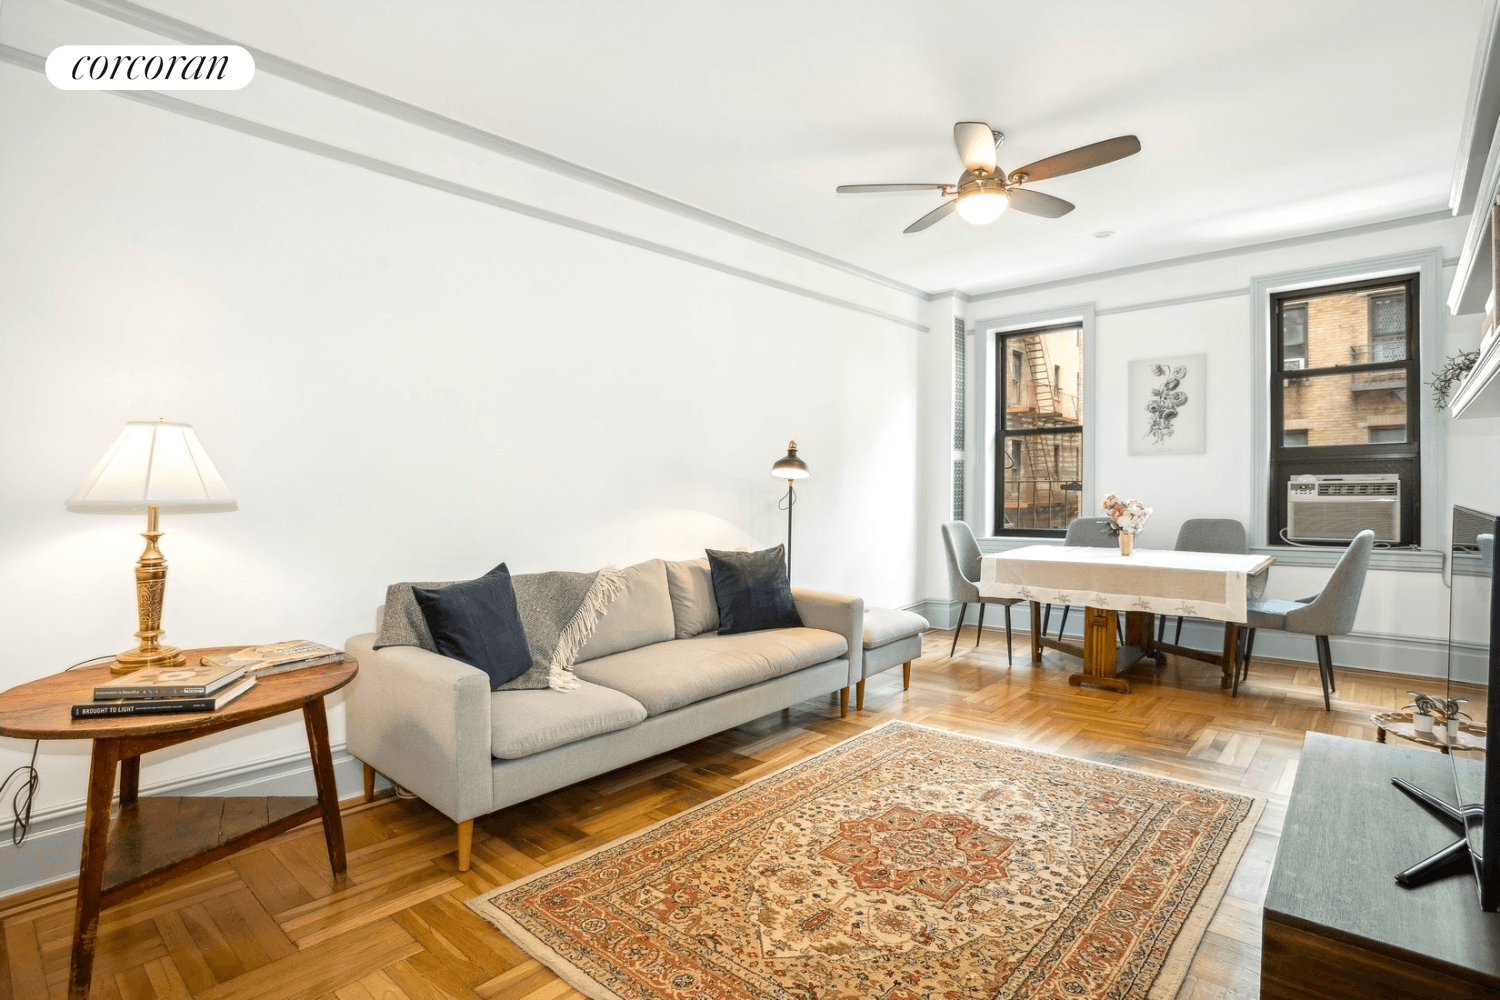 This home is a large, airy, painstakingly restored and renovated true 2 bedroom apartment in an elegant, meticulously maintained resident owned pre war gem of a building a short commute ...